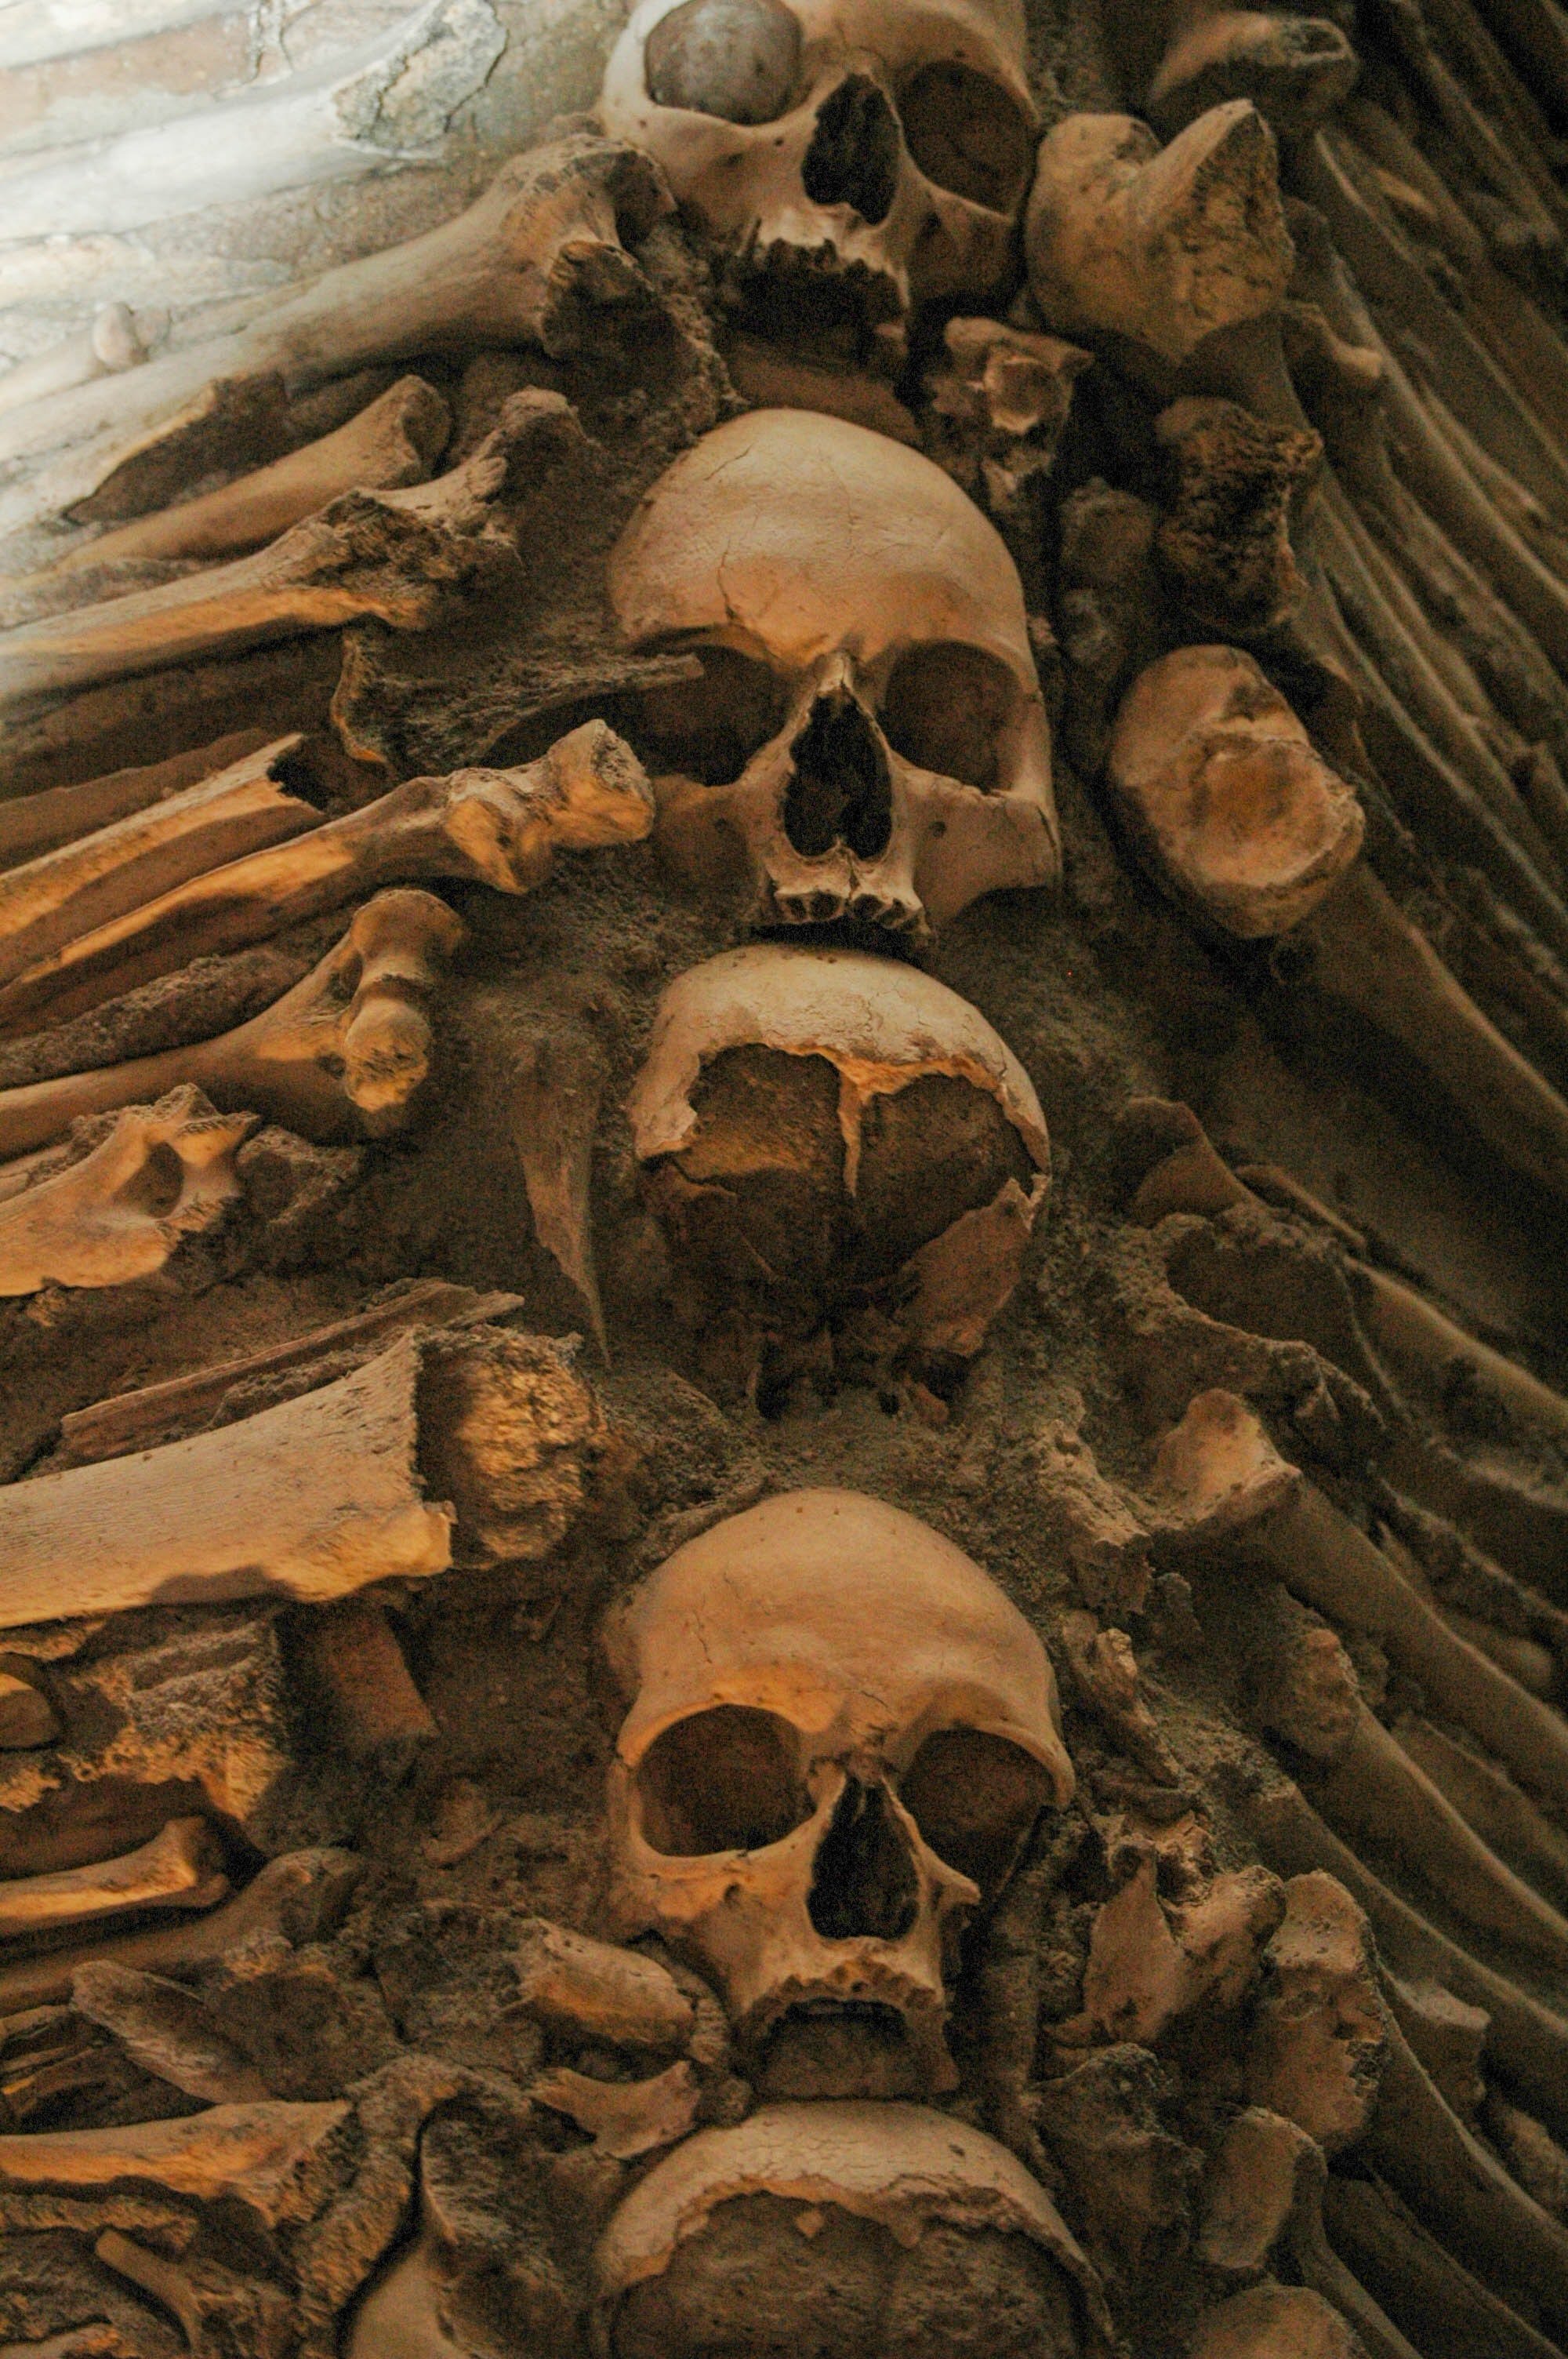 Pictured - A photo of human bones and skulls | Source: Pexels 